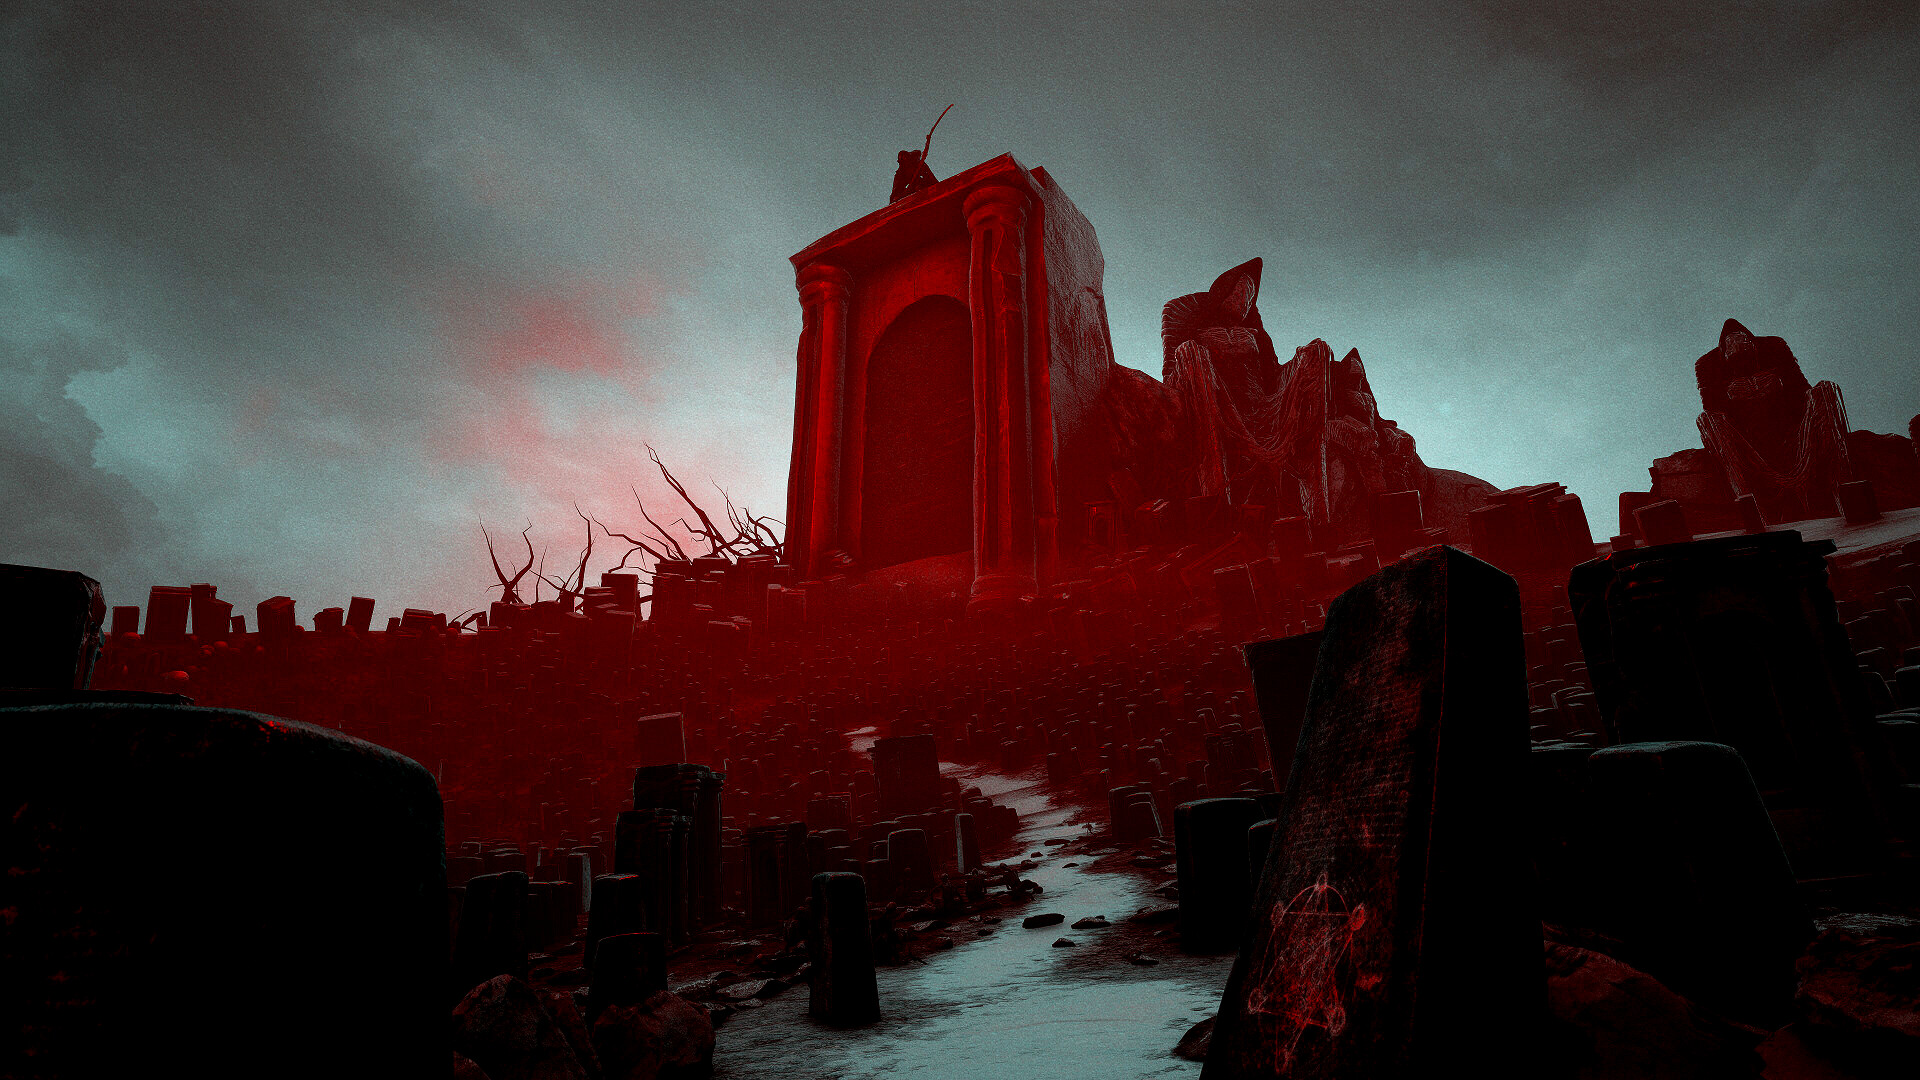 ominous red structure amid massive graveyard